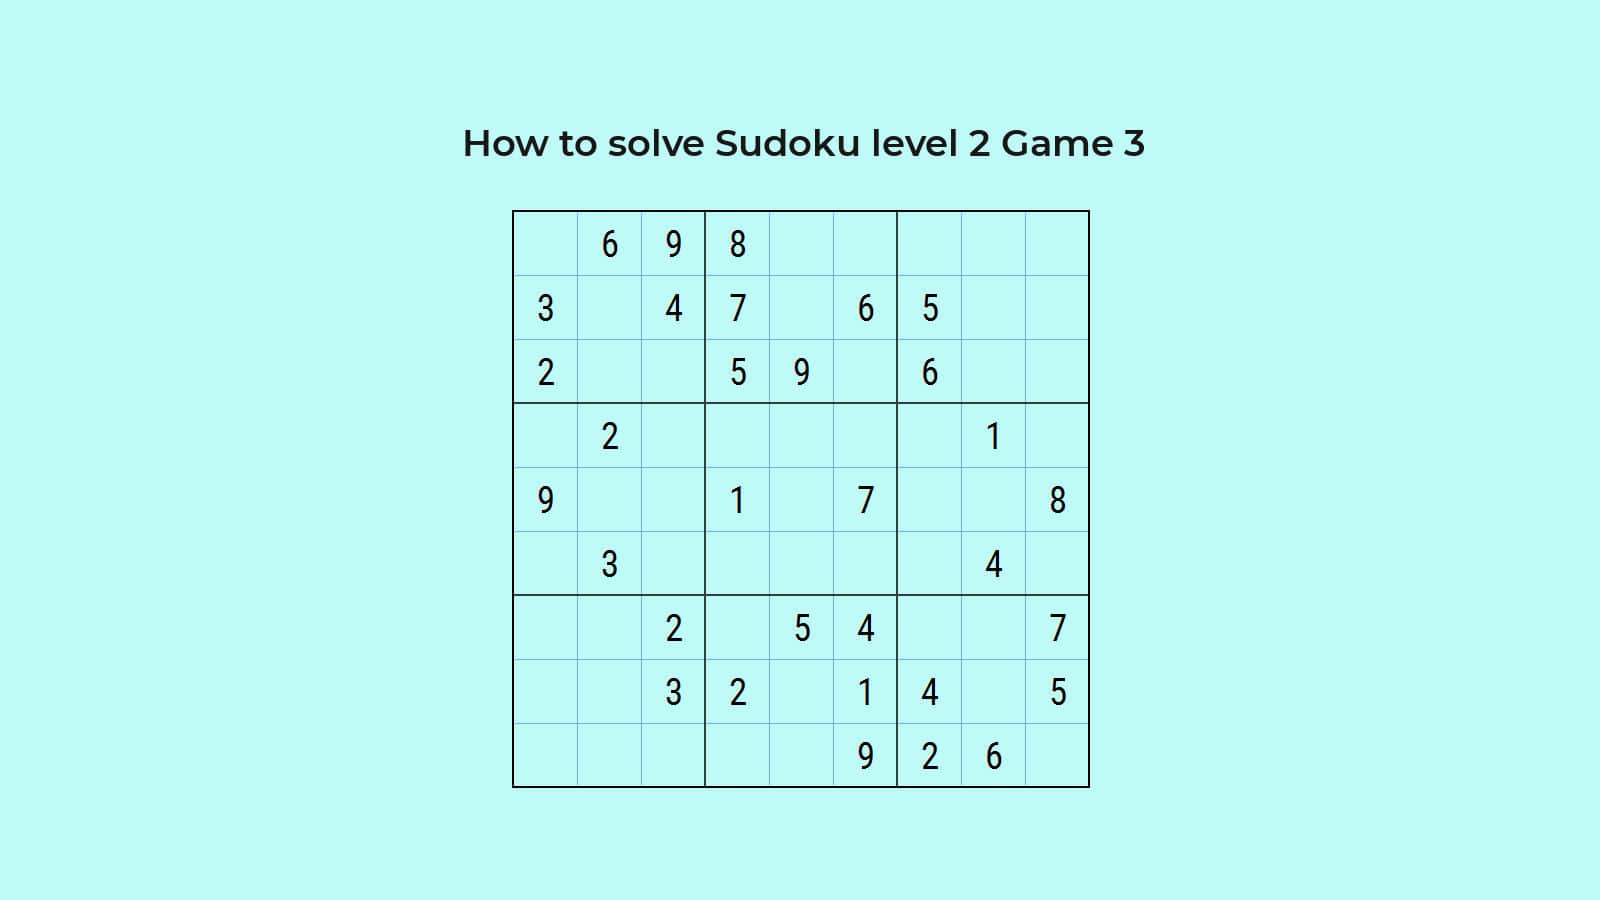 How to solve Sudoku level 2 Game 3